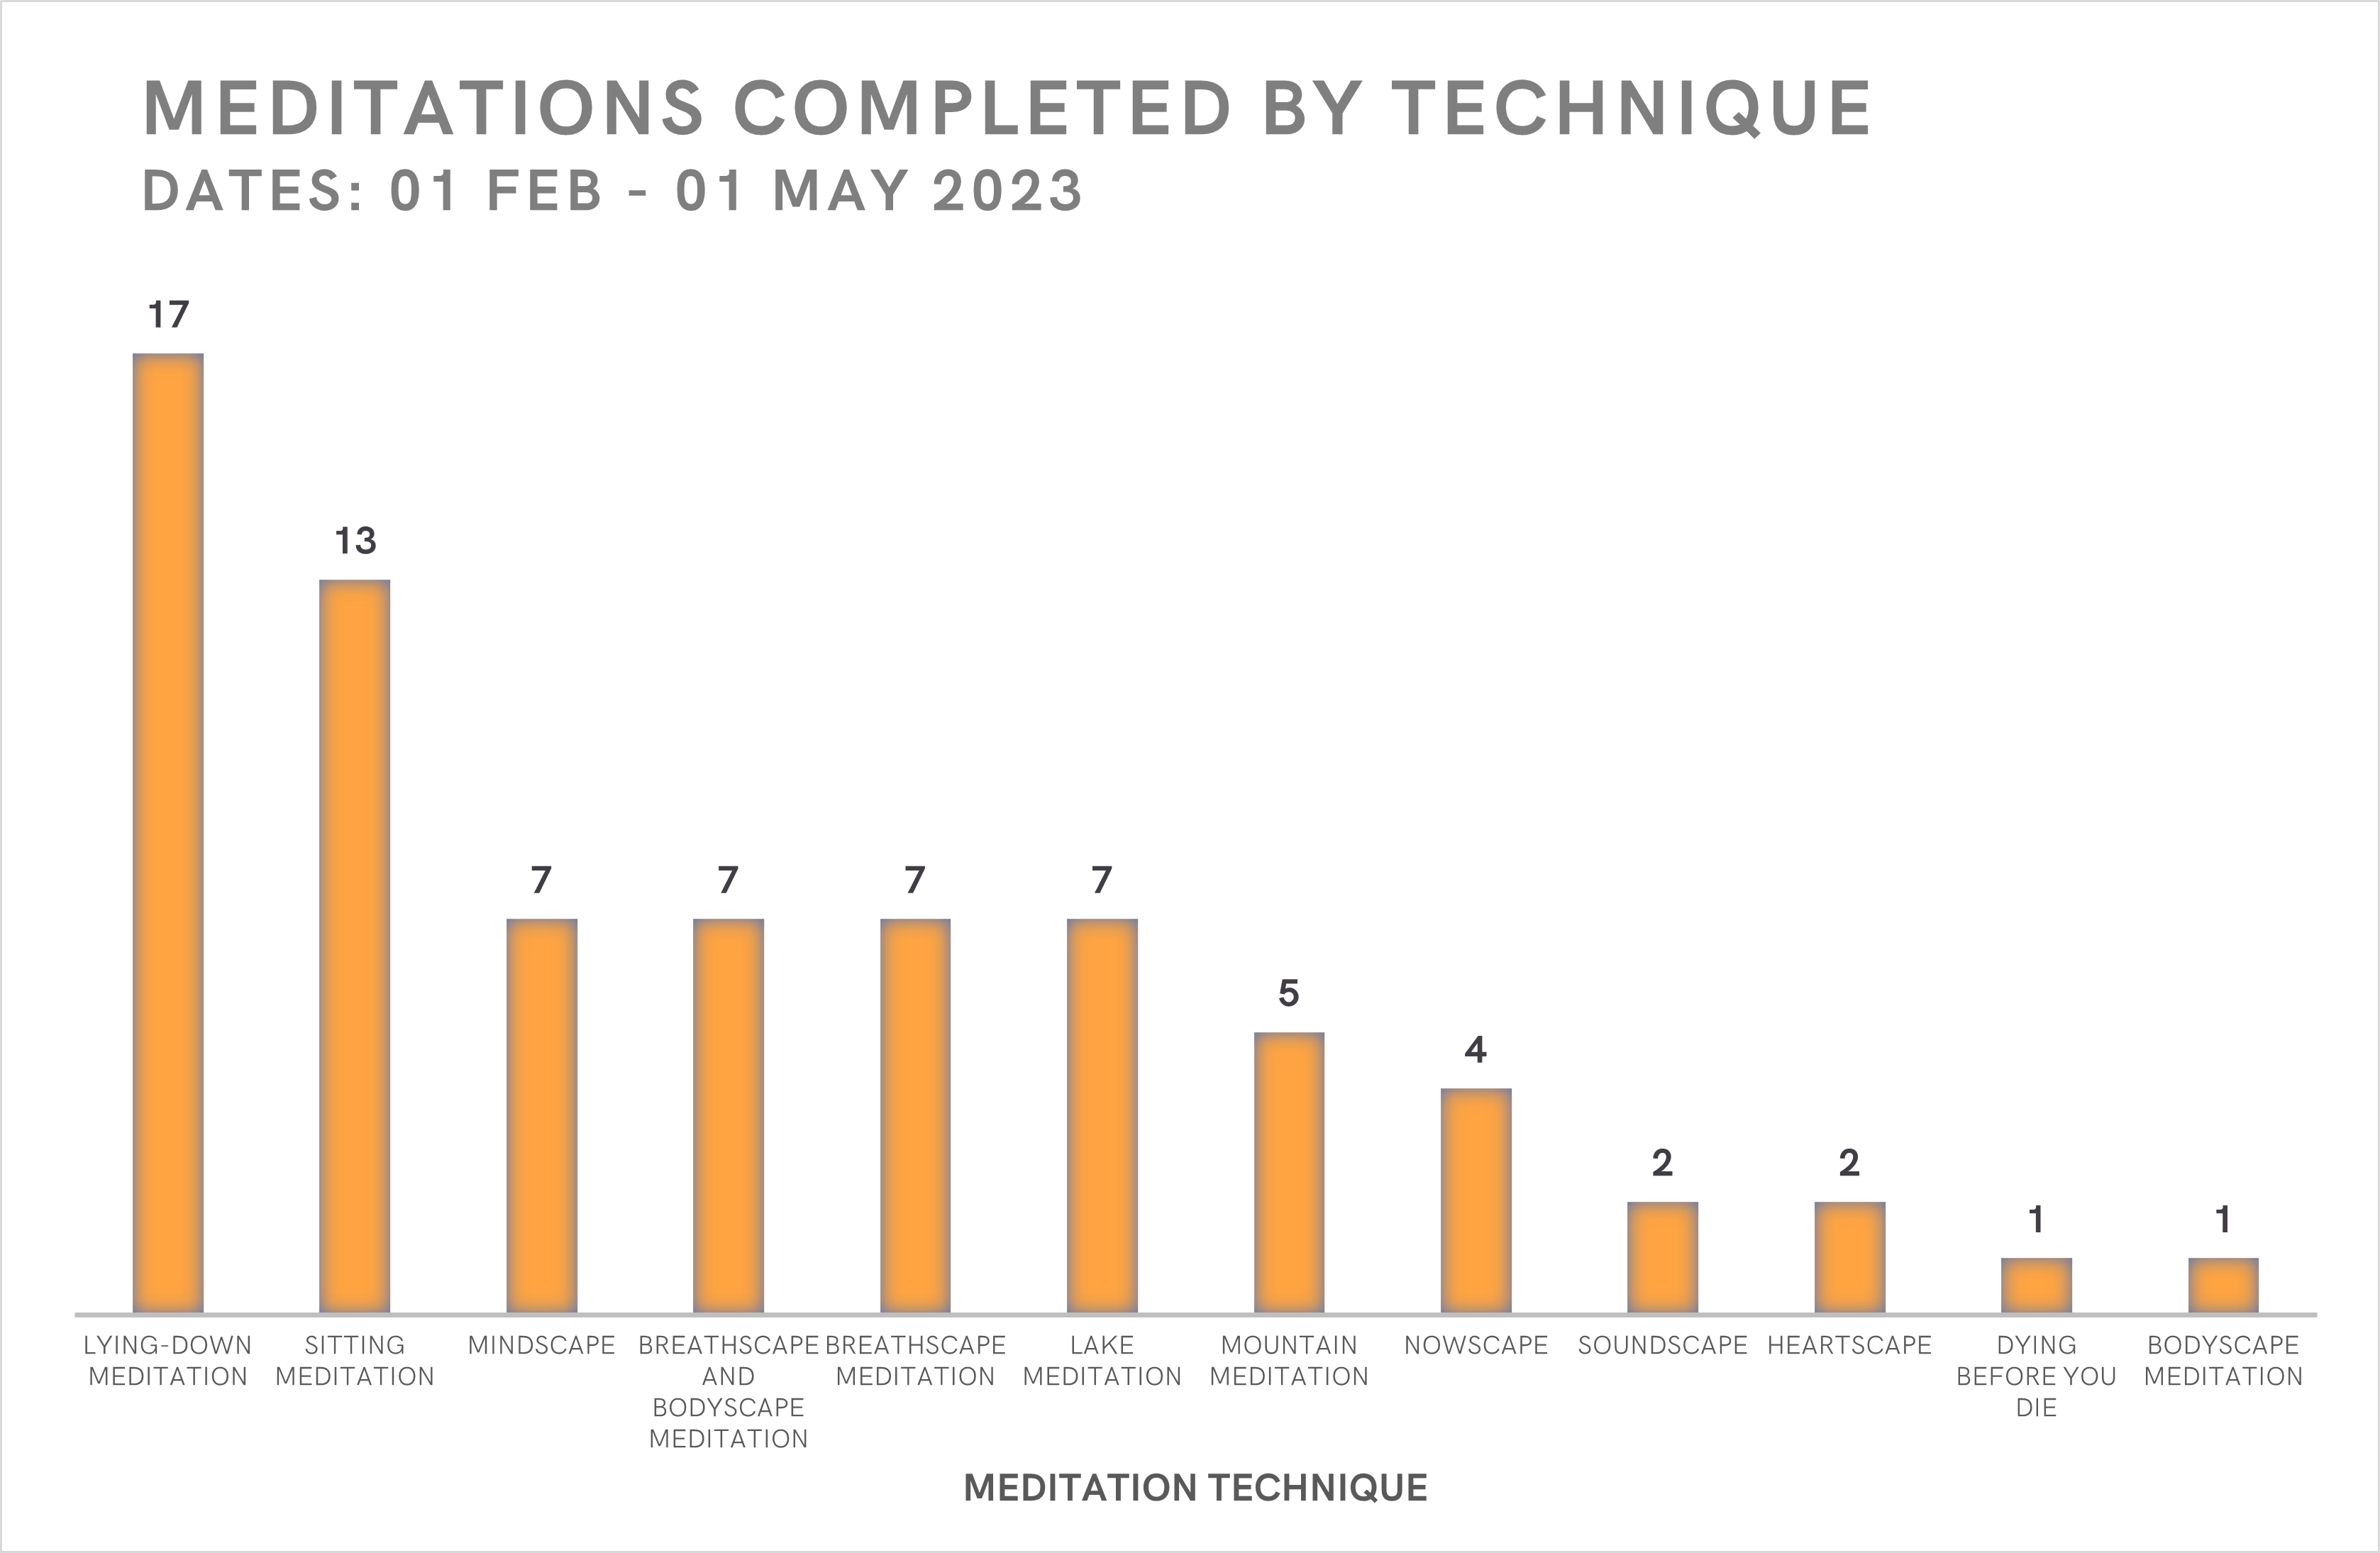 Fig. 3: A bar chart showing the frequency of each meditation technique practiced in the sample period.